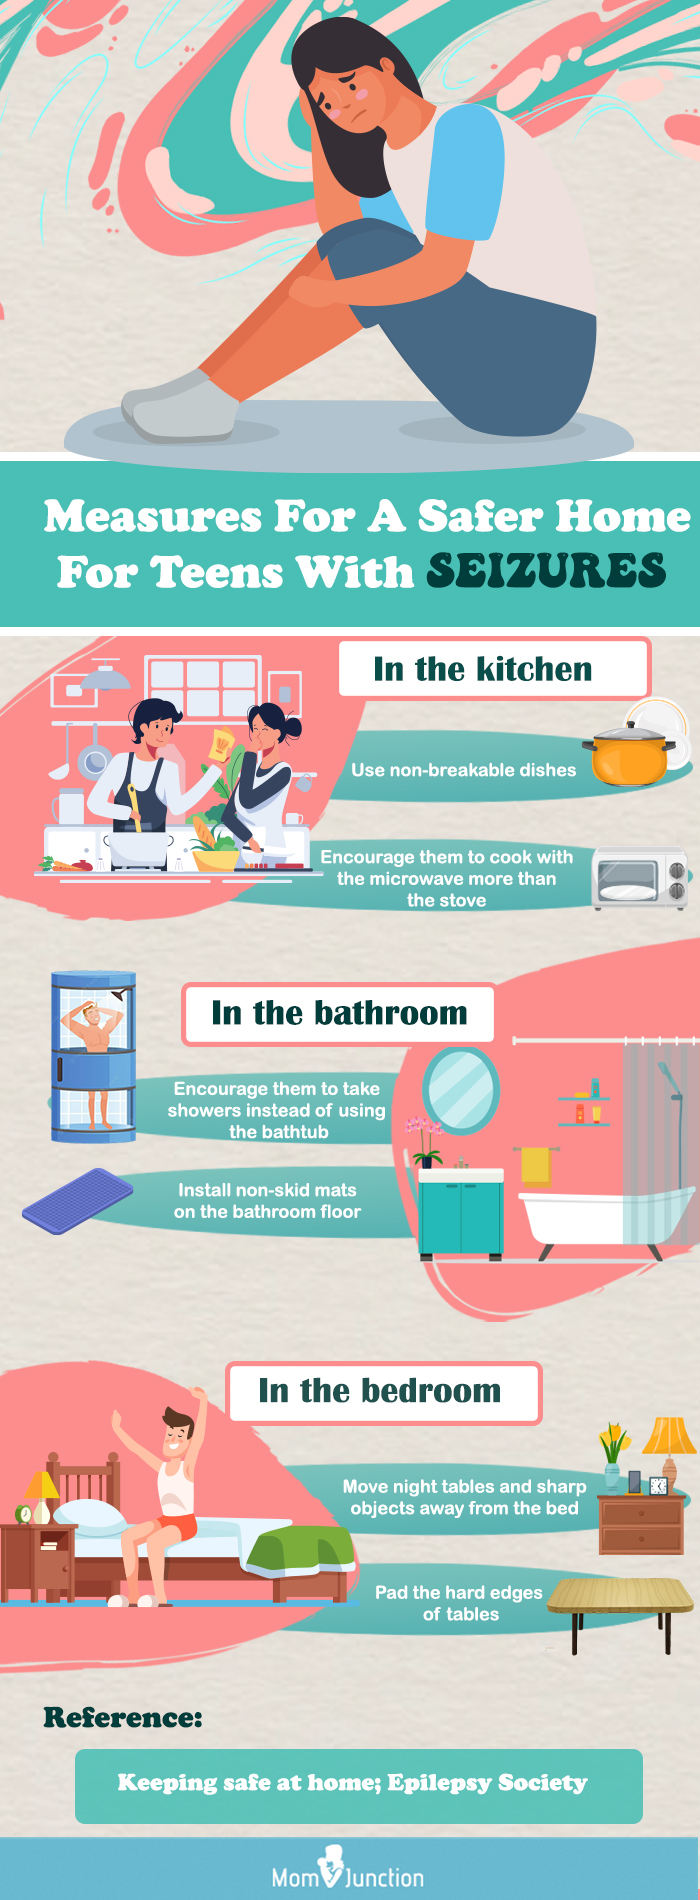 how to make your home safer for teens with seizures [infographic]